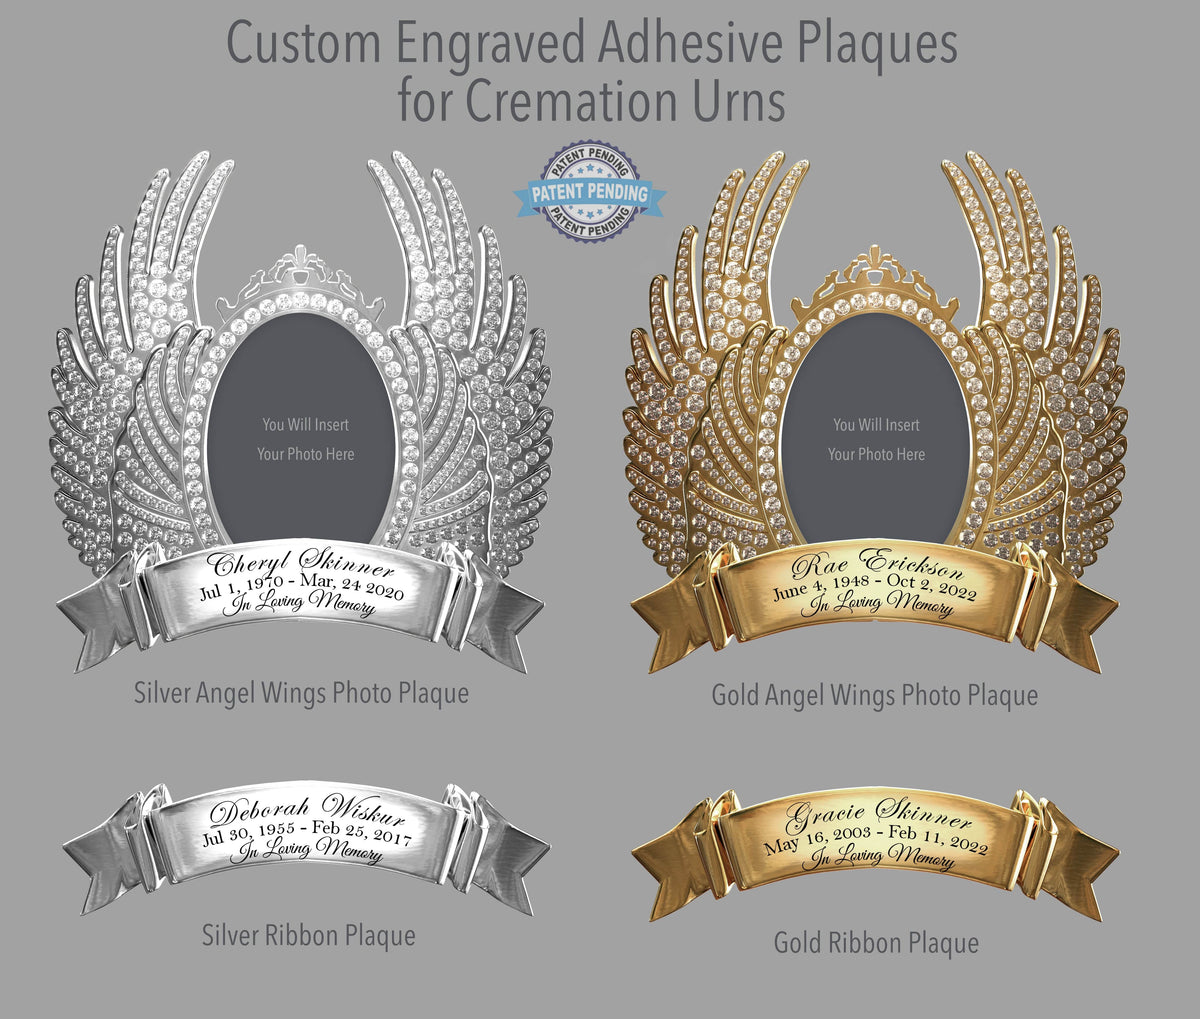 Commemorative Cremation Urns Home &amp; Garden Heavenly Clouds Cremation Urns